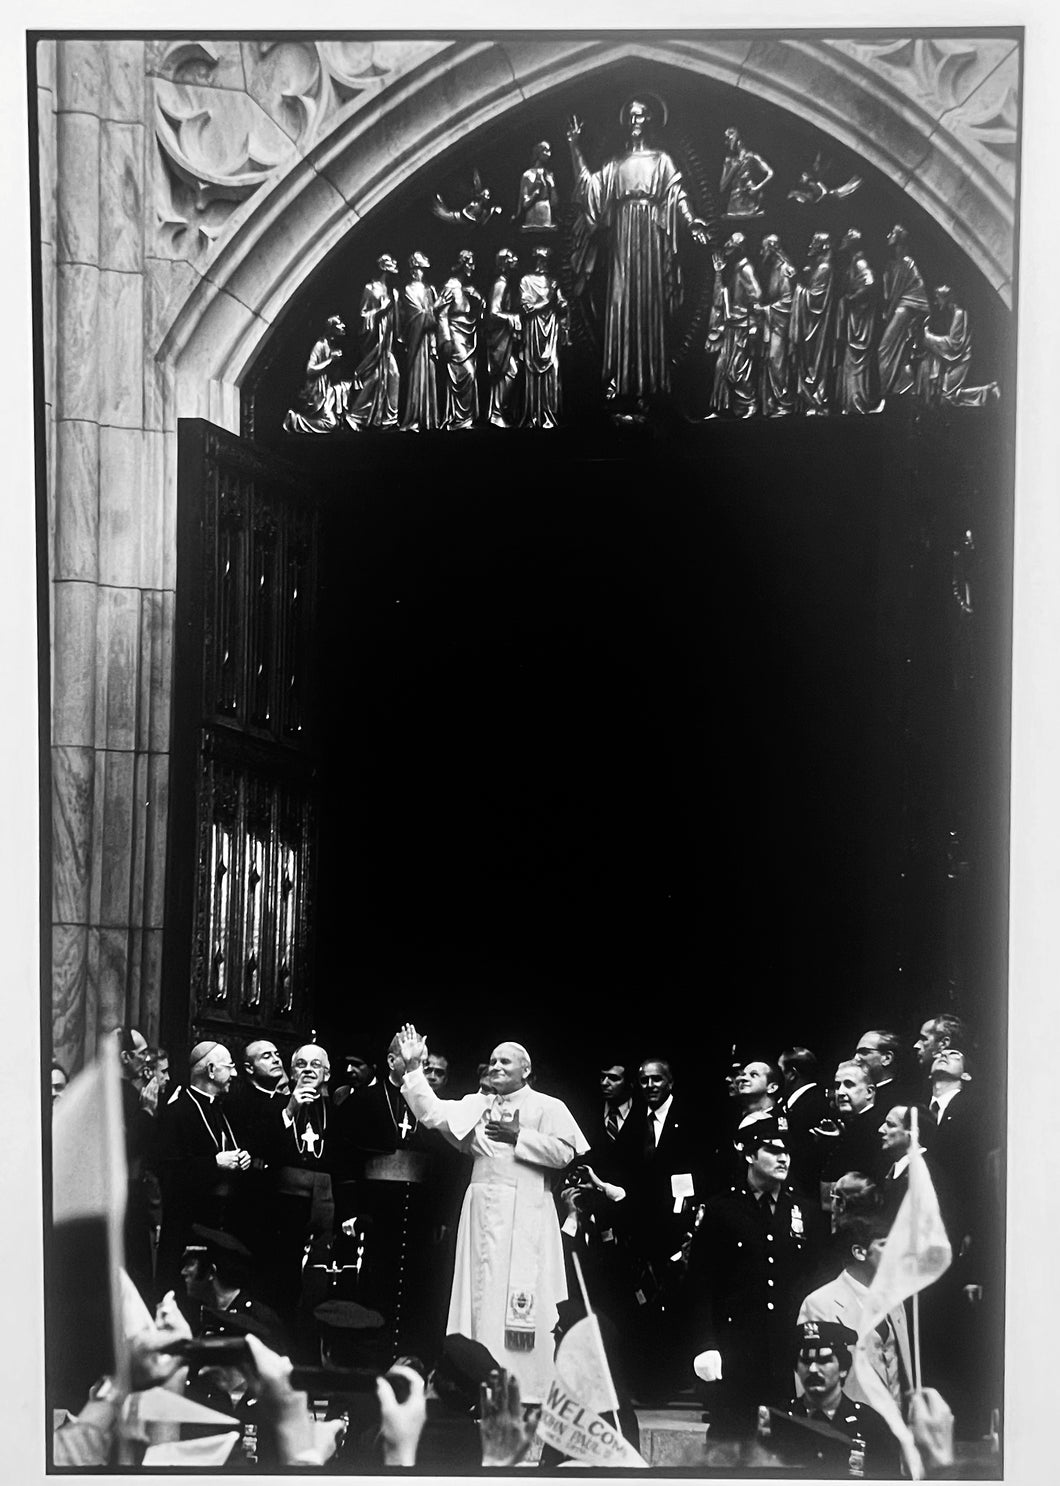 Pope John Paul II, Black and White Photograph at St Patrick's Cathedral New York 1970s by Burt Glinn